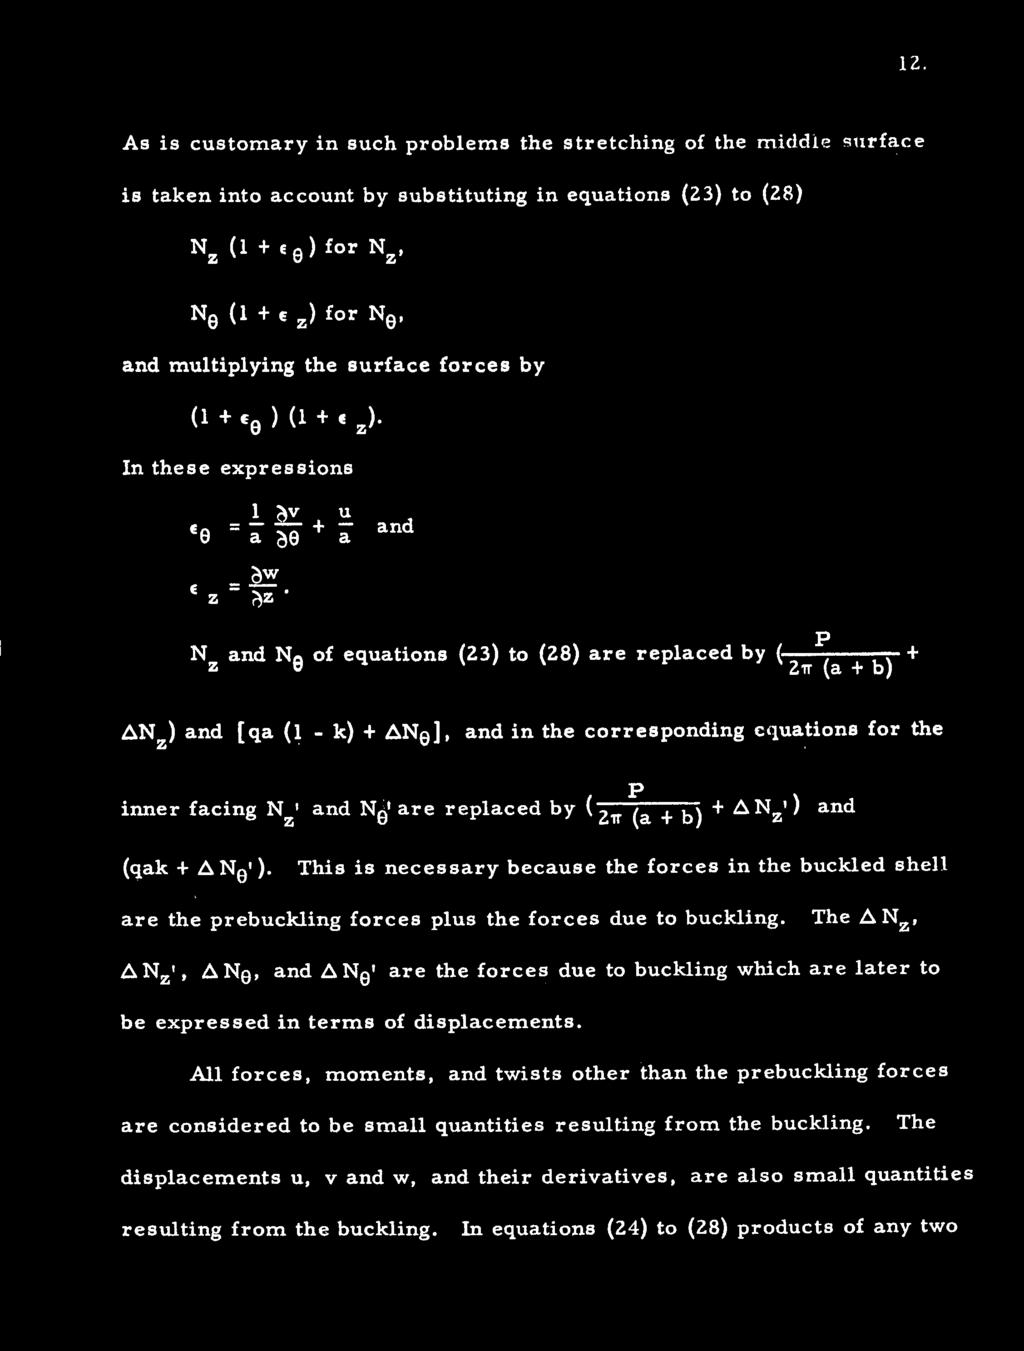 ,0 a and E z = z and e of equations (23) to (28) are replaced by ( 27r (a + b) Liz) and [qa (1 - k) + A0 ], and in the corresponding equations for the, P inner facing z ' and ot are replaced by 21T